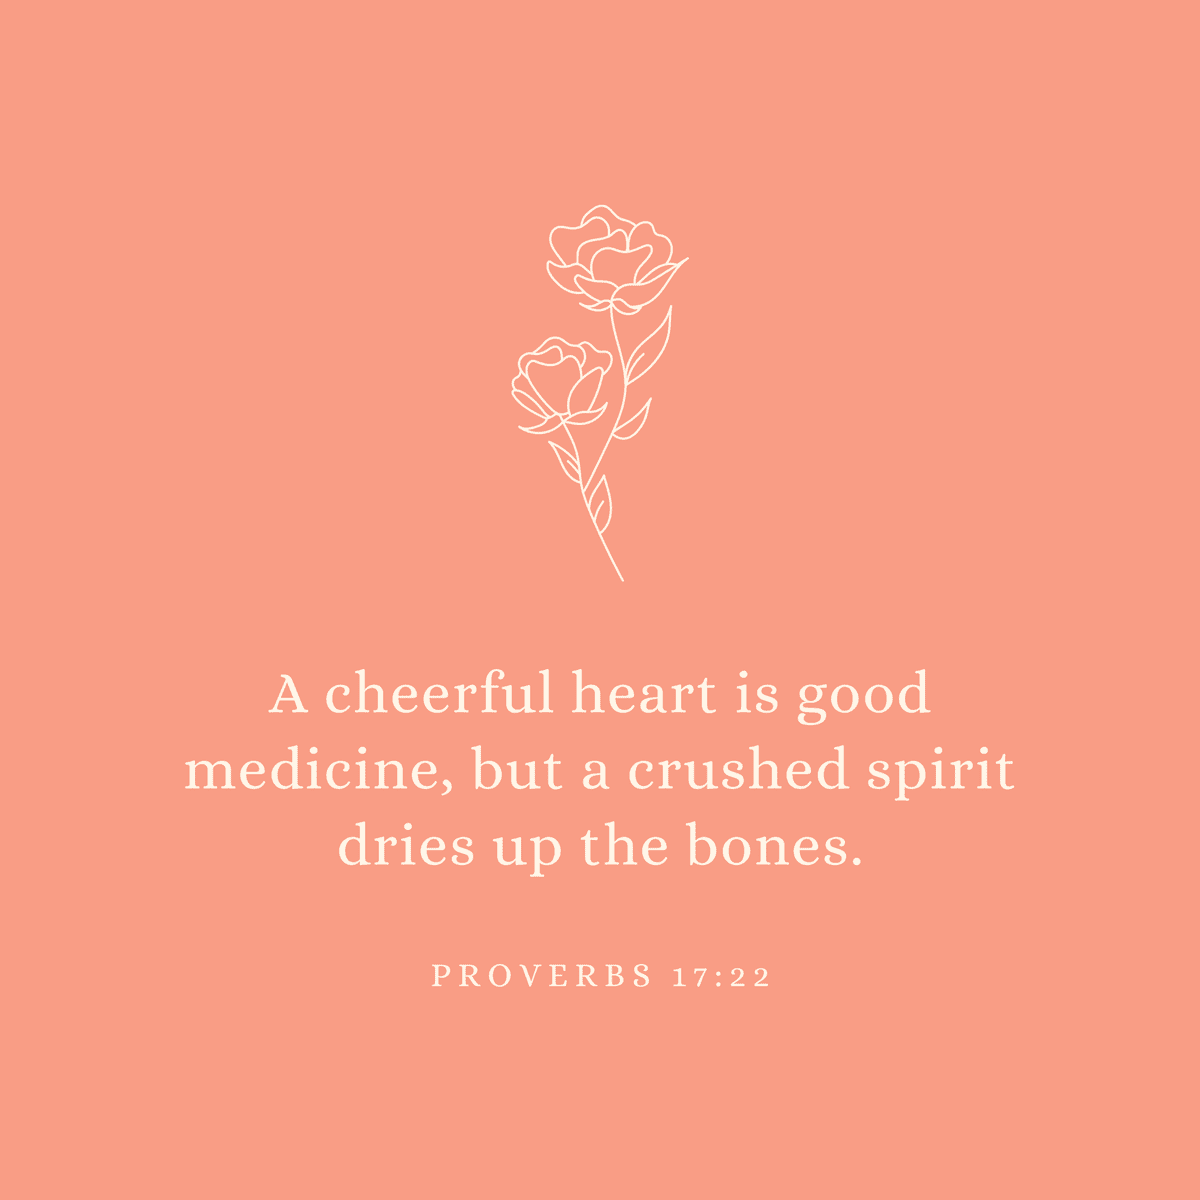 Proverbs 17:22 A cheerful heart is good medicine, but a crushed spirit dries up the bones.